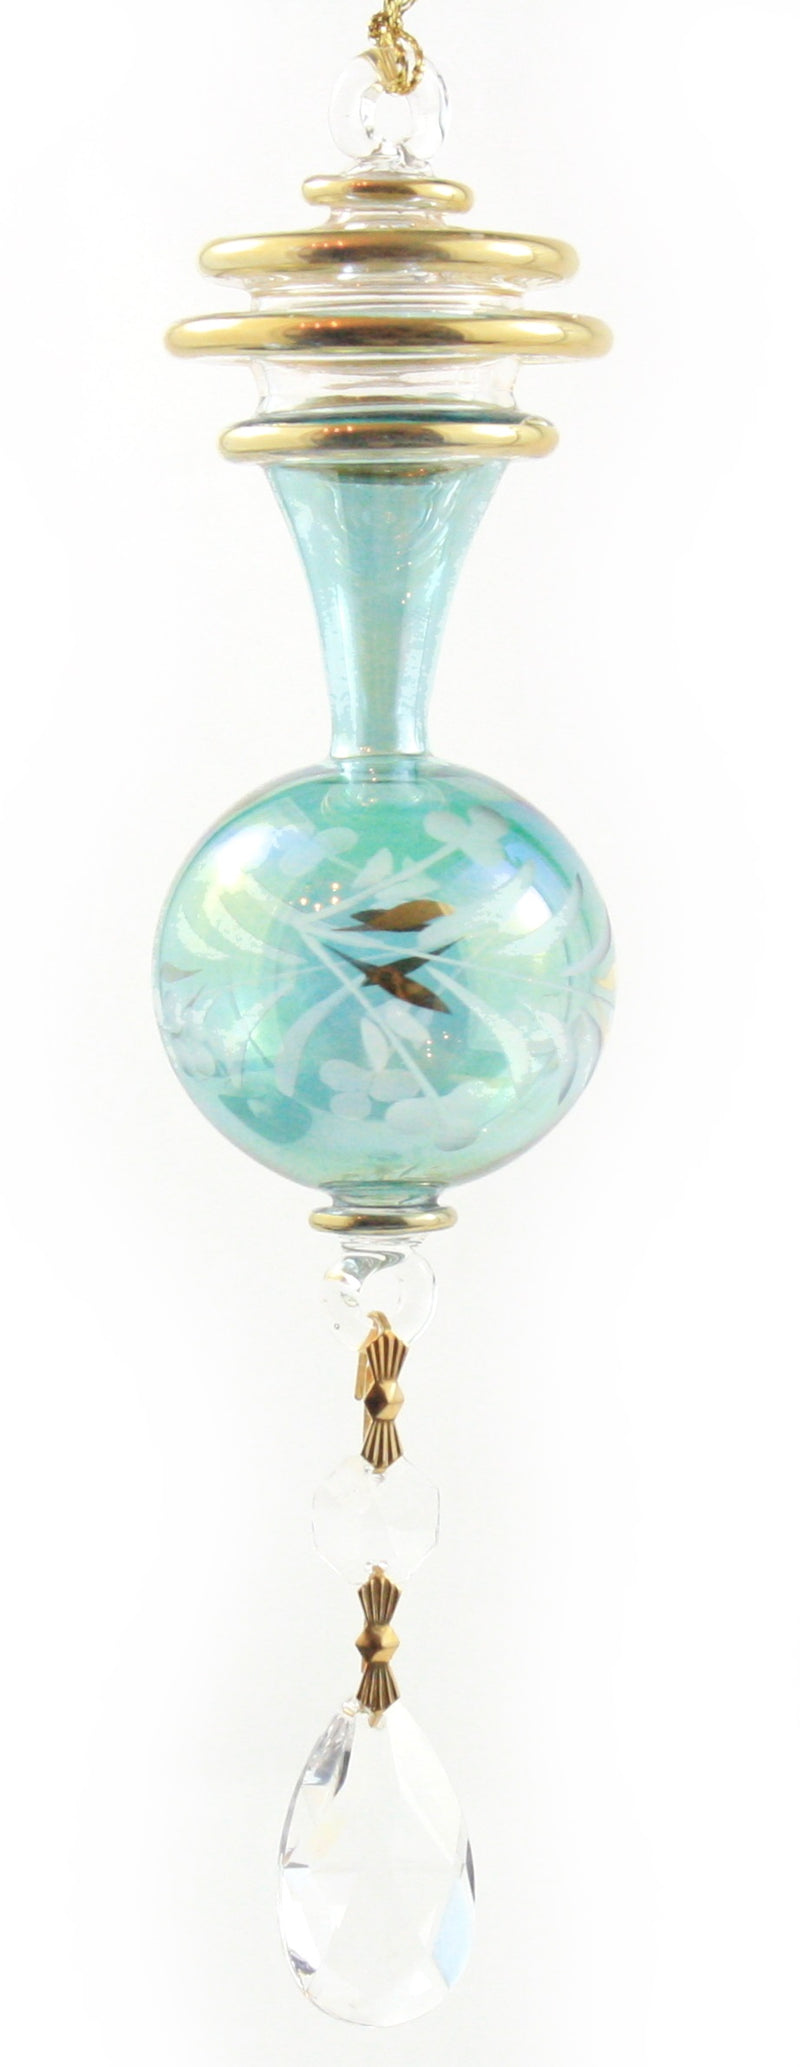 Egyptian Glass Dangle Ornament with 4 Gold Rings - Green